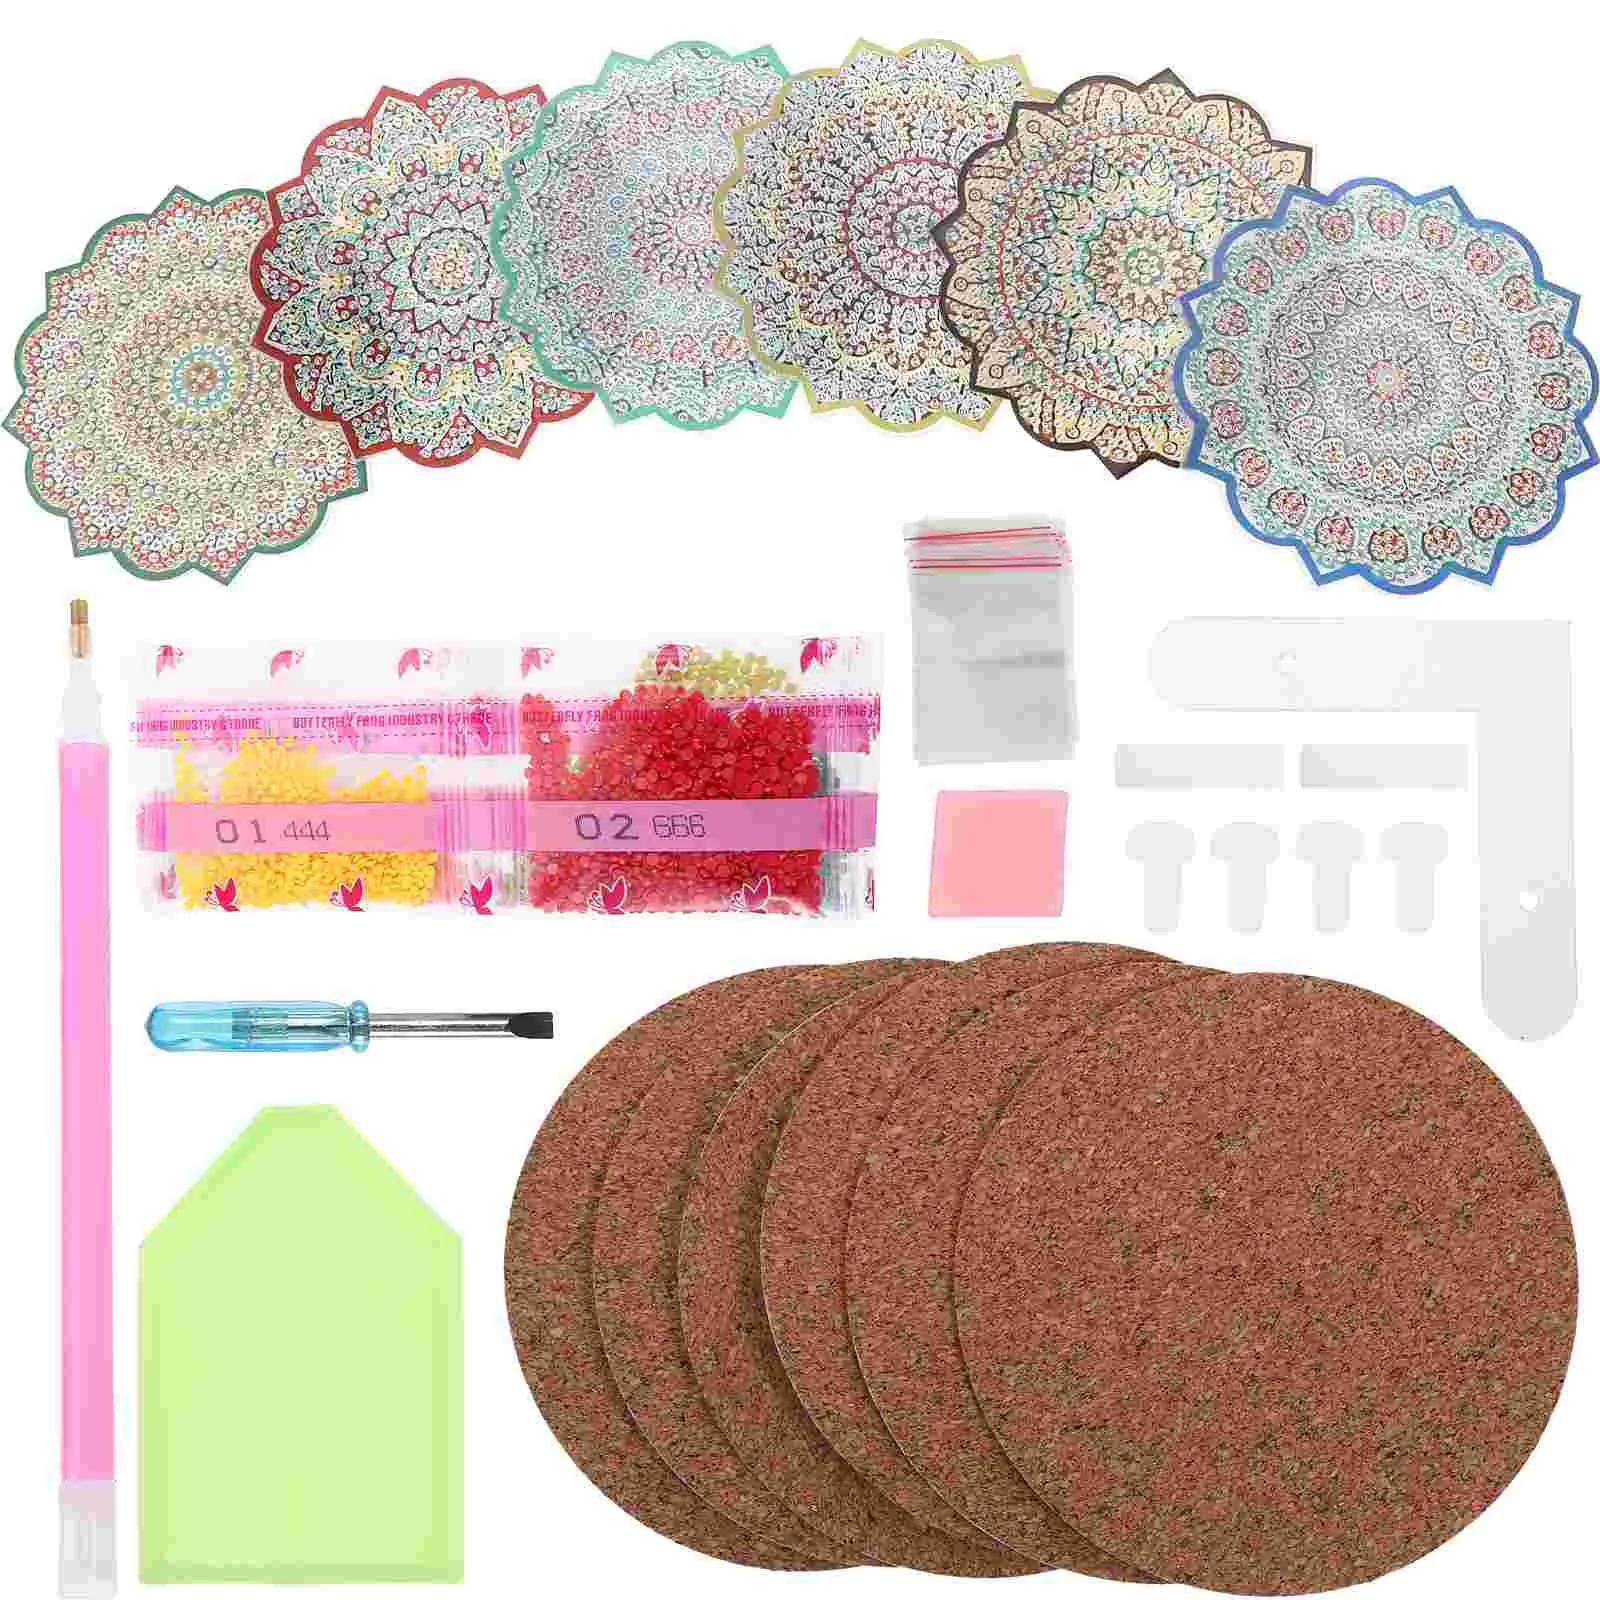 

Cup Diamond Painted Coaster Flower Cork Pot Holder Anti-scald Pads Mat for Home Bohemian Exquisite Mats Simple Acrylic Coasters